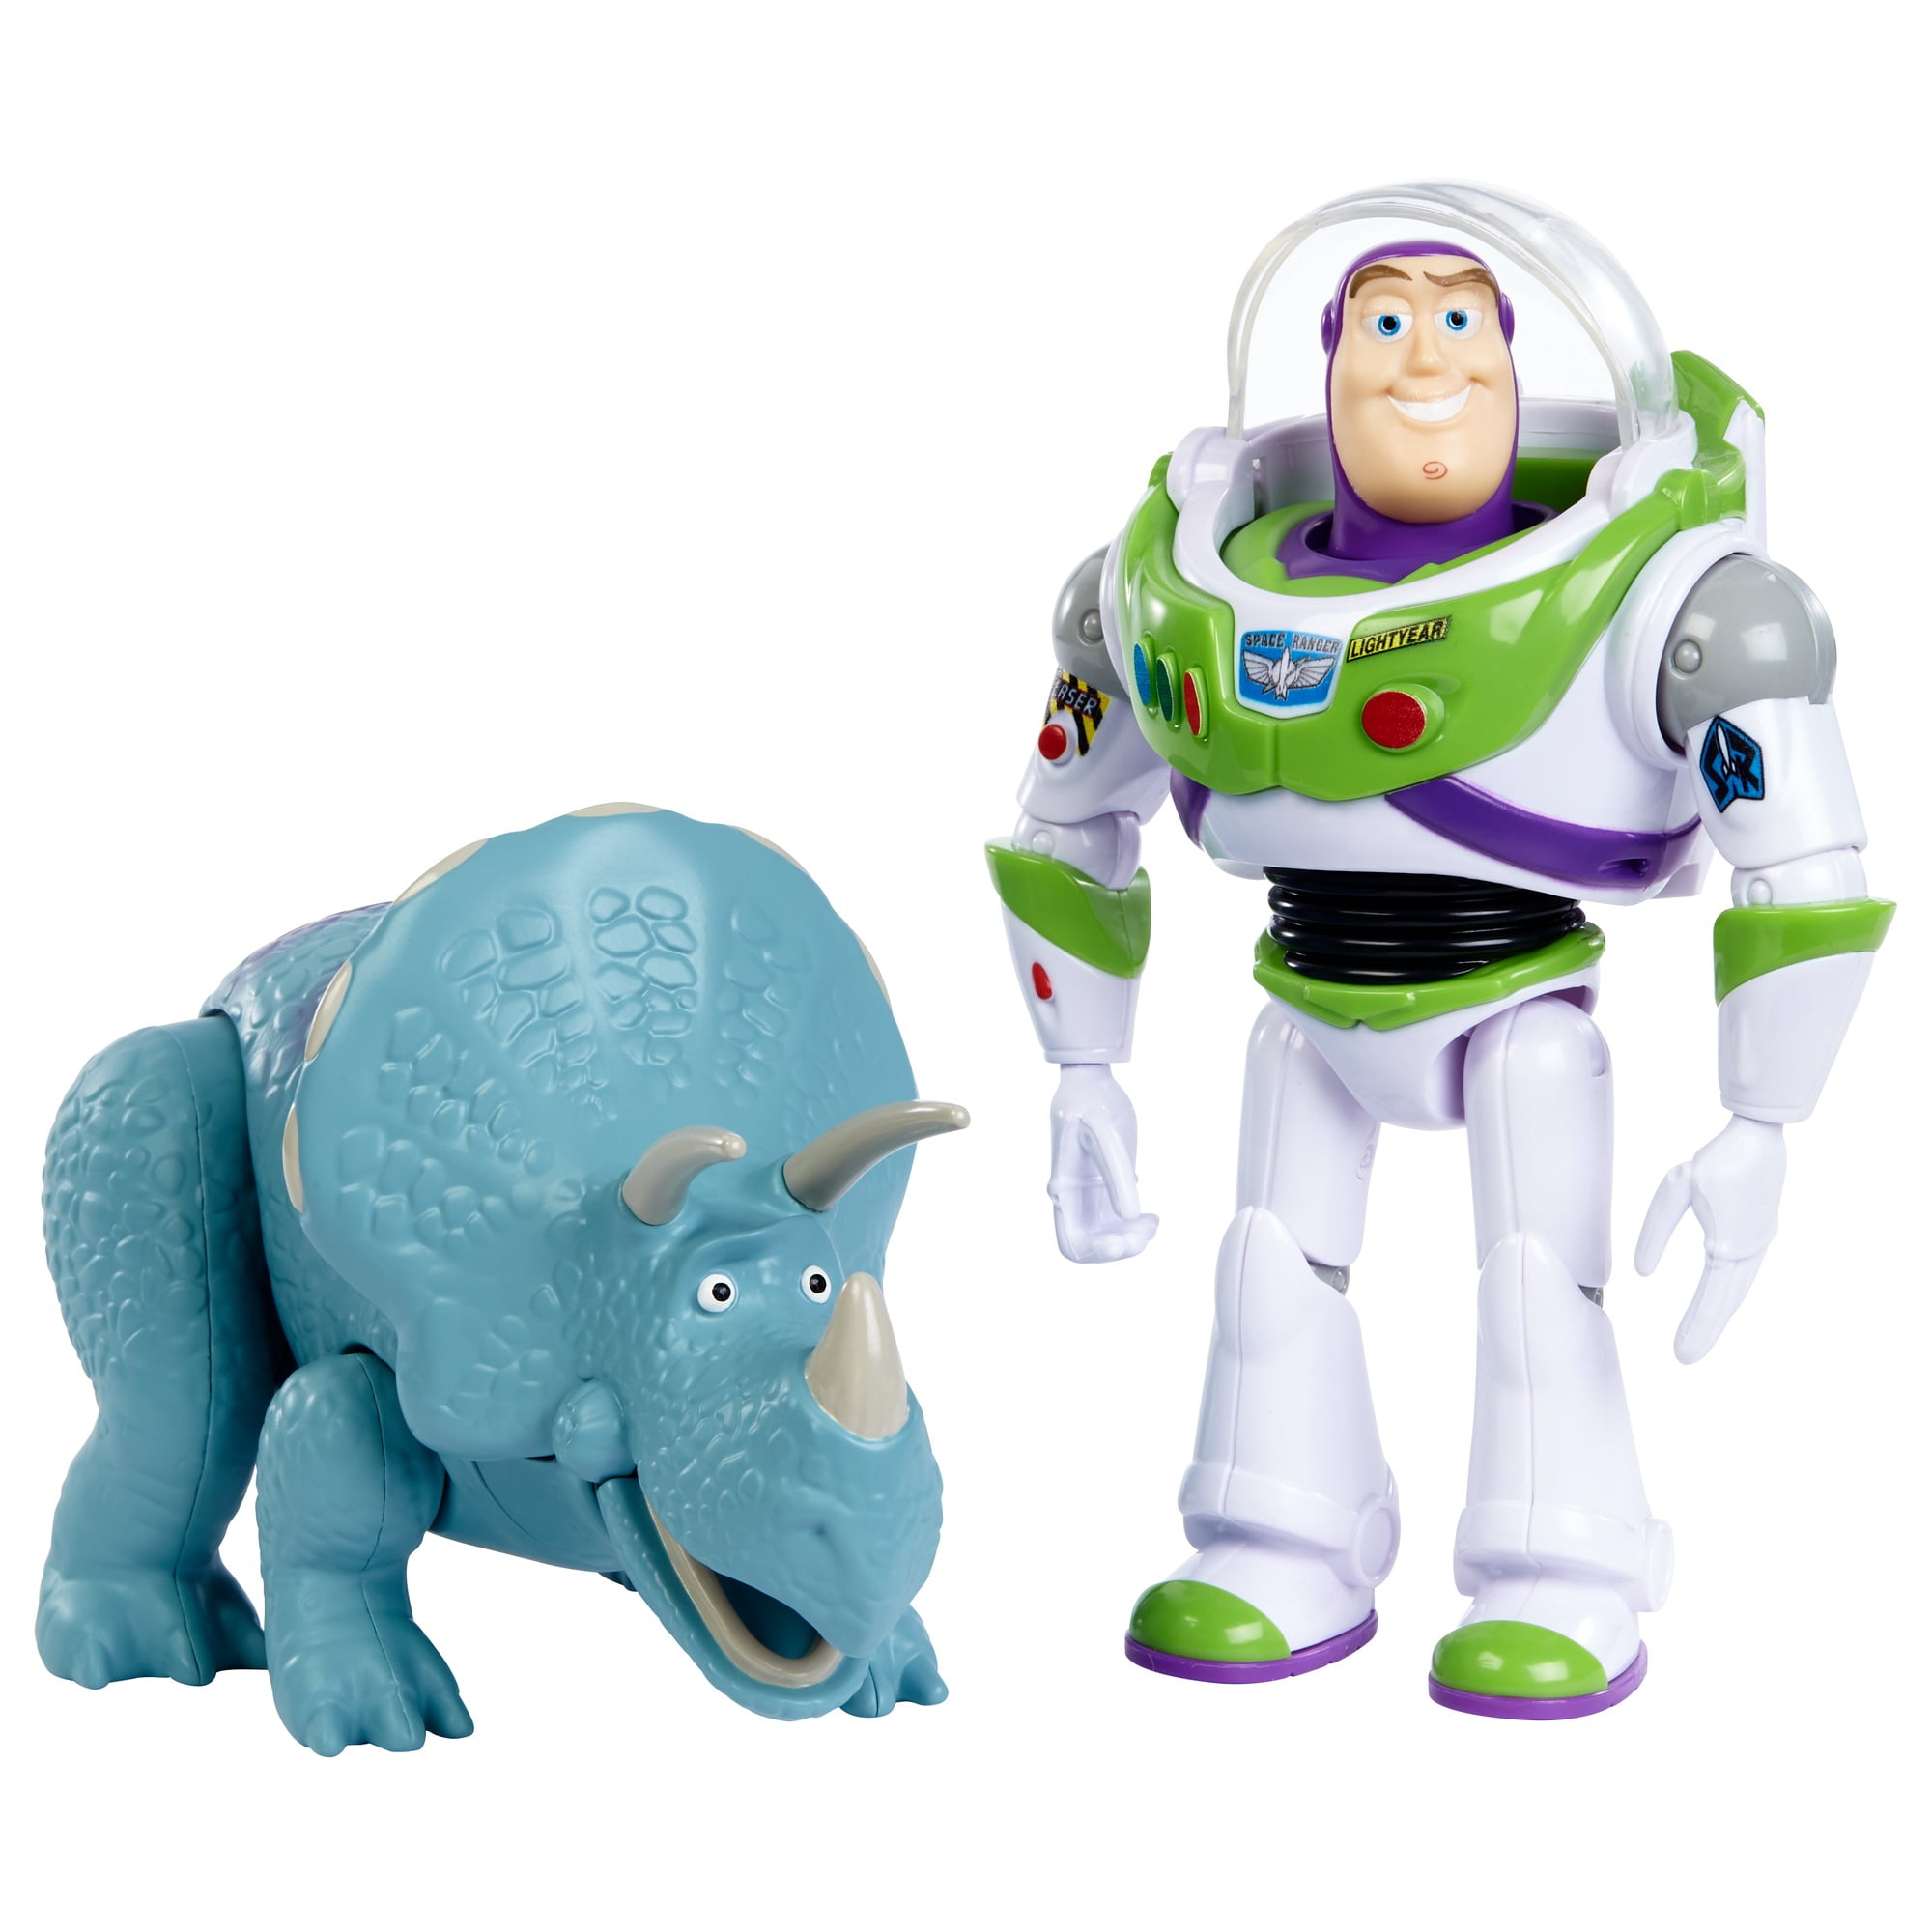 Buzz Lightyear and Trixie 2-Pack Figures Disney Pixar Toy Story 